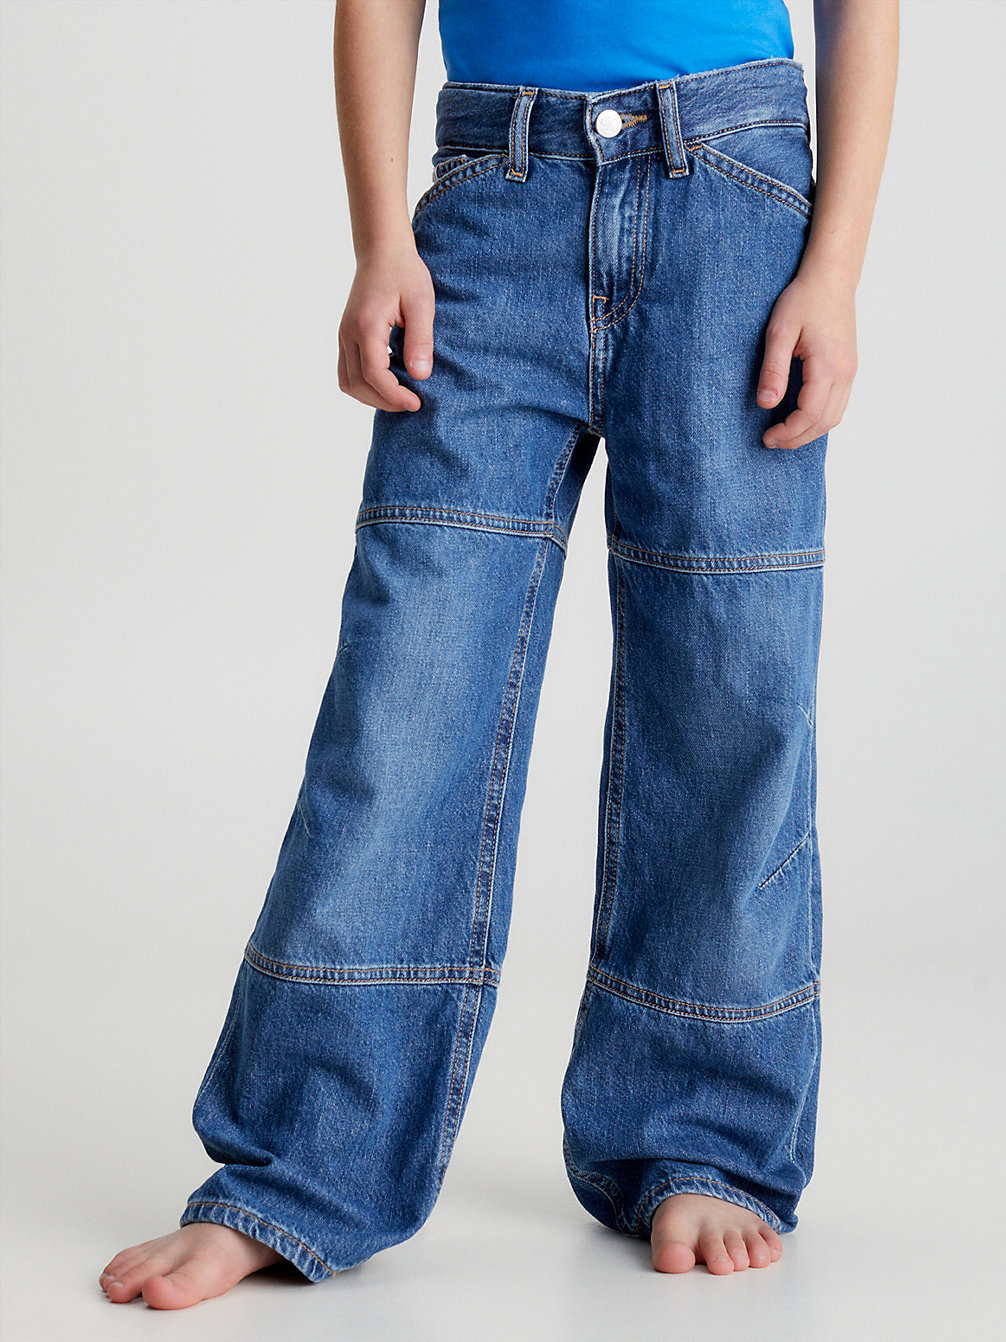 Jean Skater Relaxed > AUTHENTIC VINTAGE NEW > undefined boys > Calvin Klein